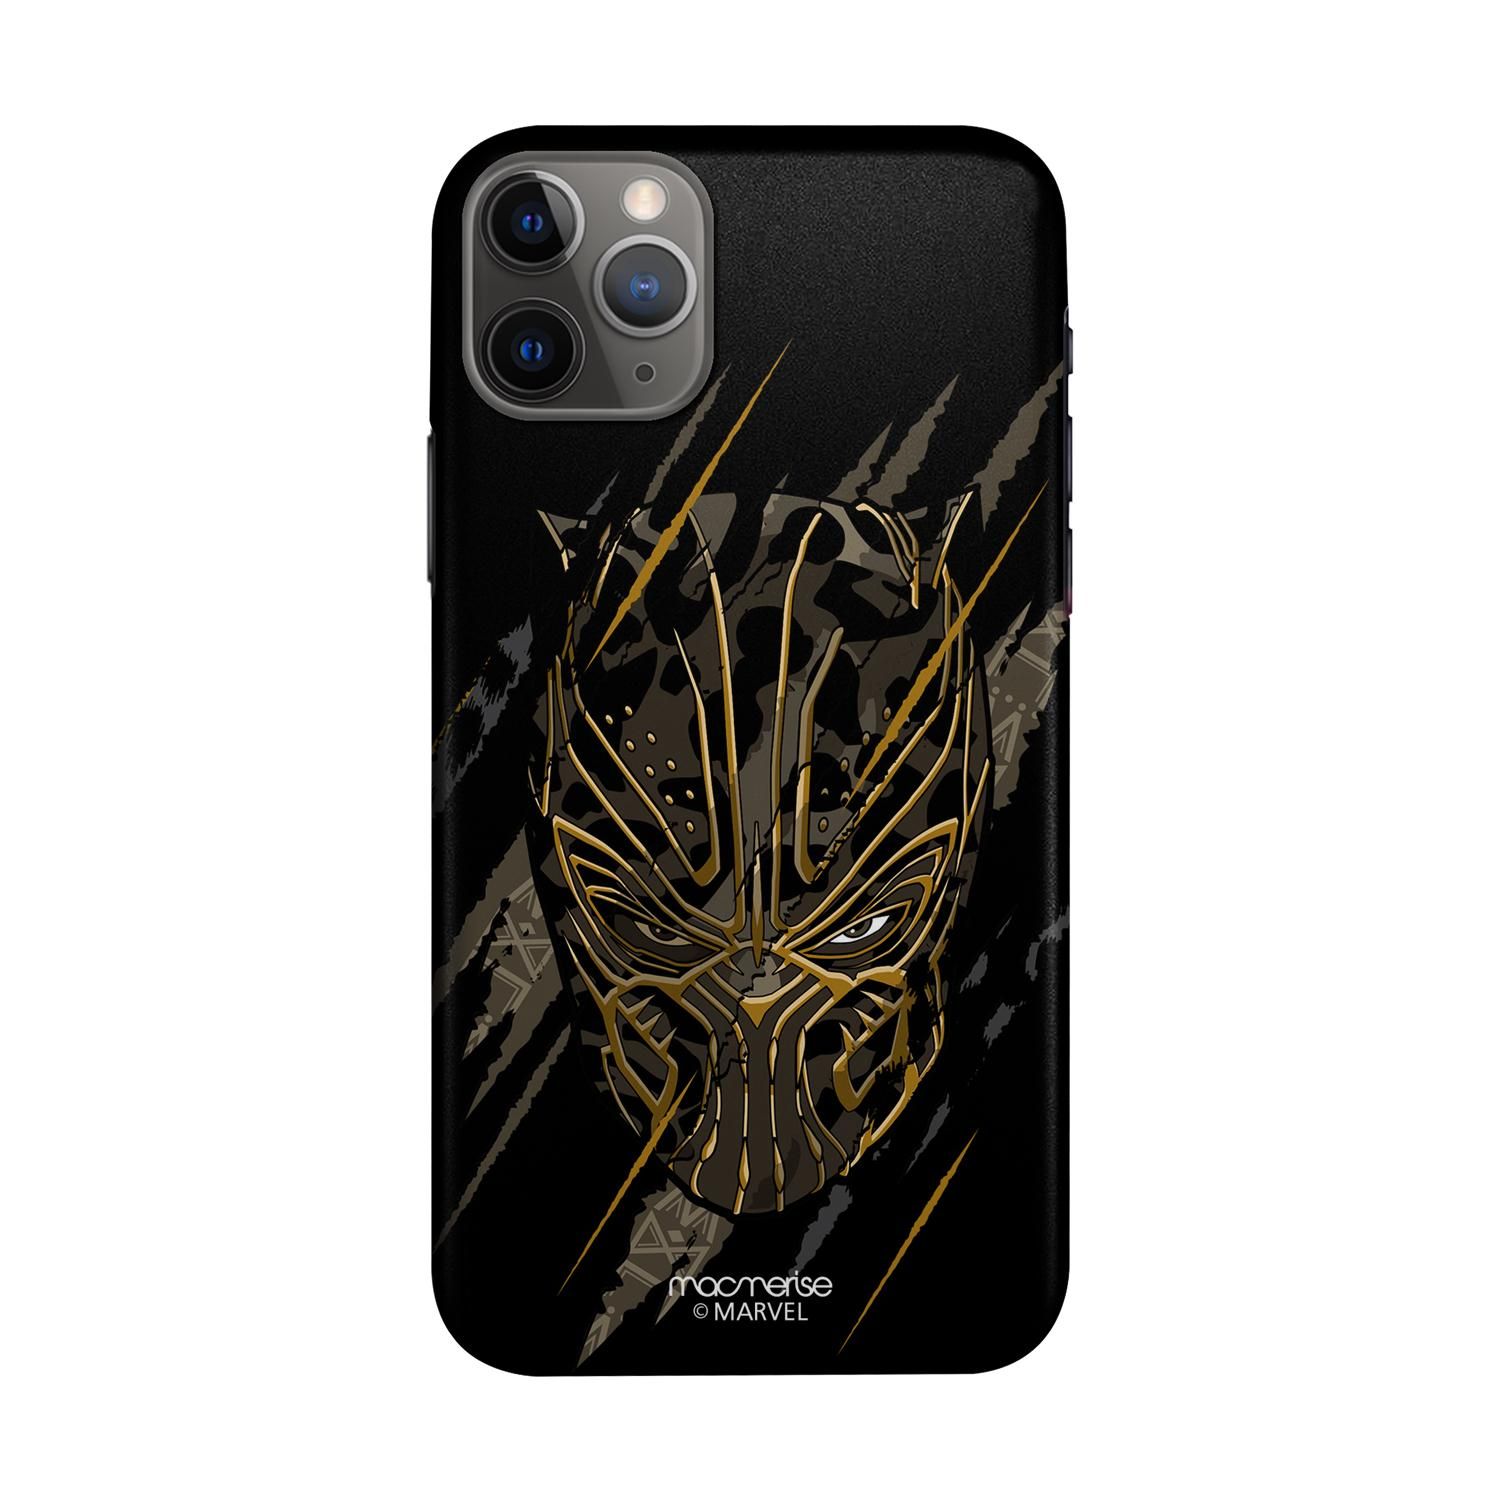 Buy Headstrong Contender - Sleek Phone Case for iPhone 11 Pro Online